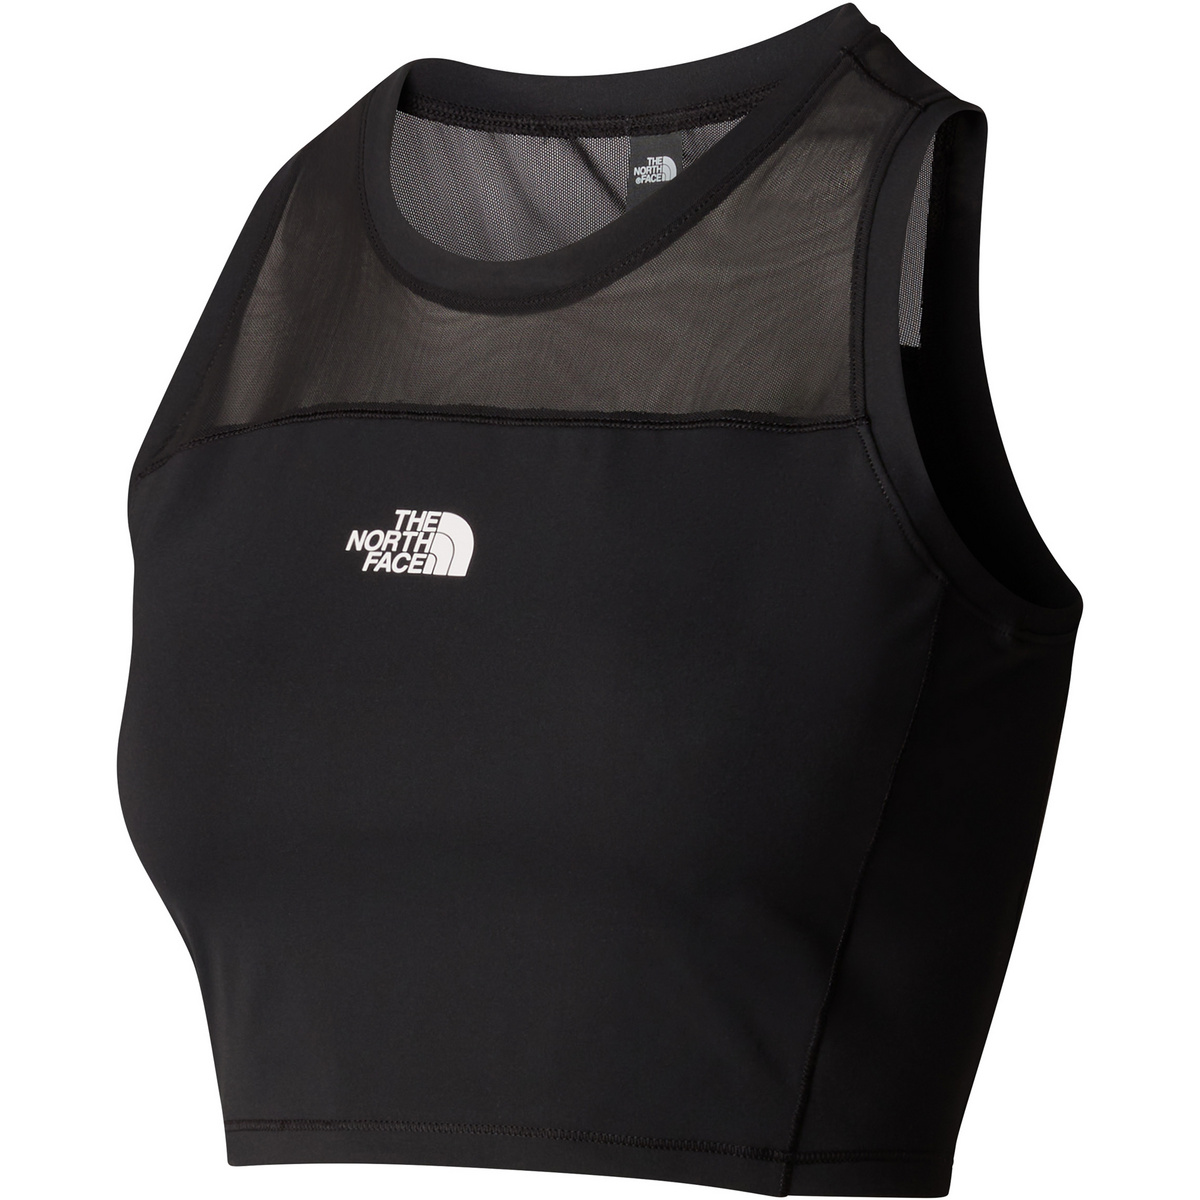 The North Face Damen Movmynt Tiny Top von The North Face